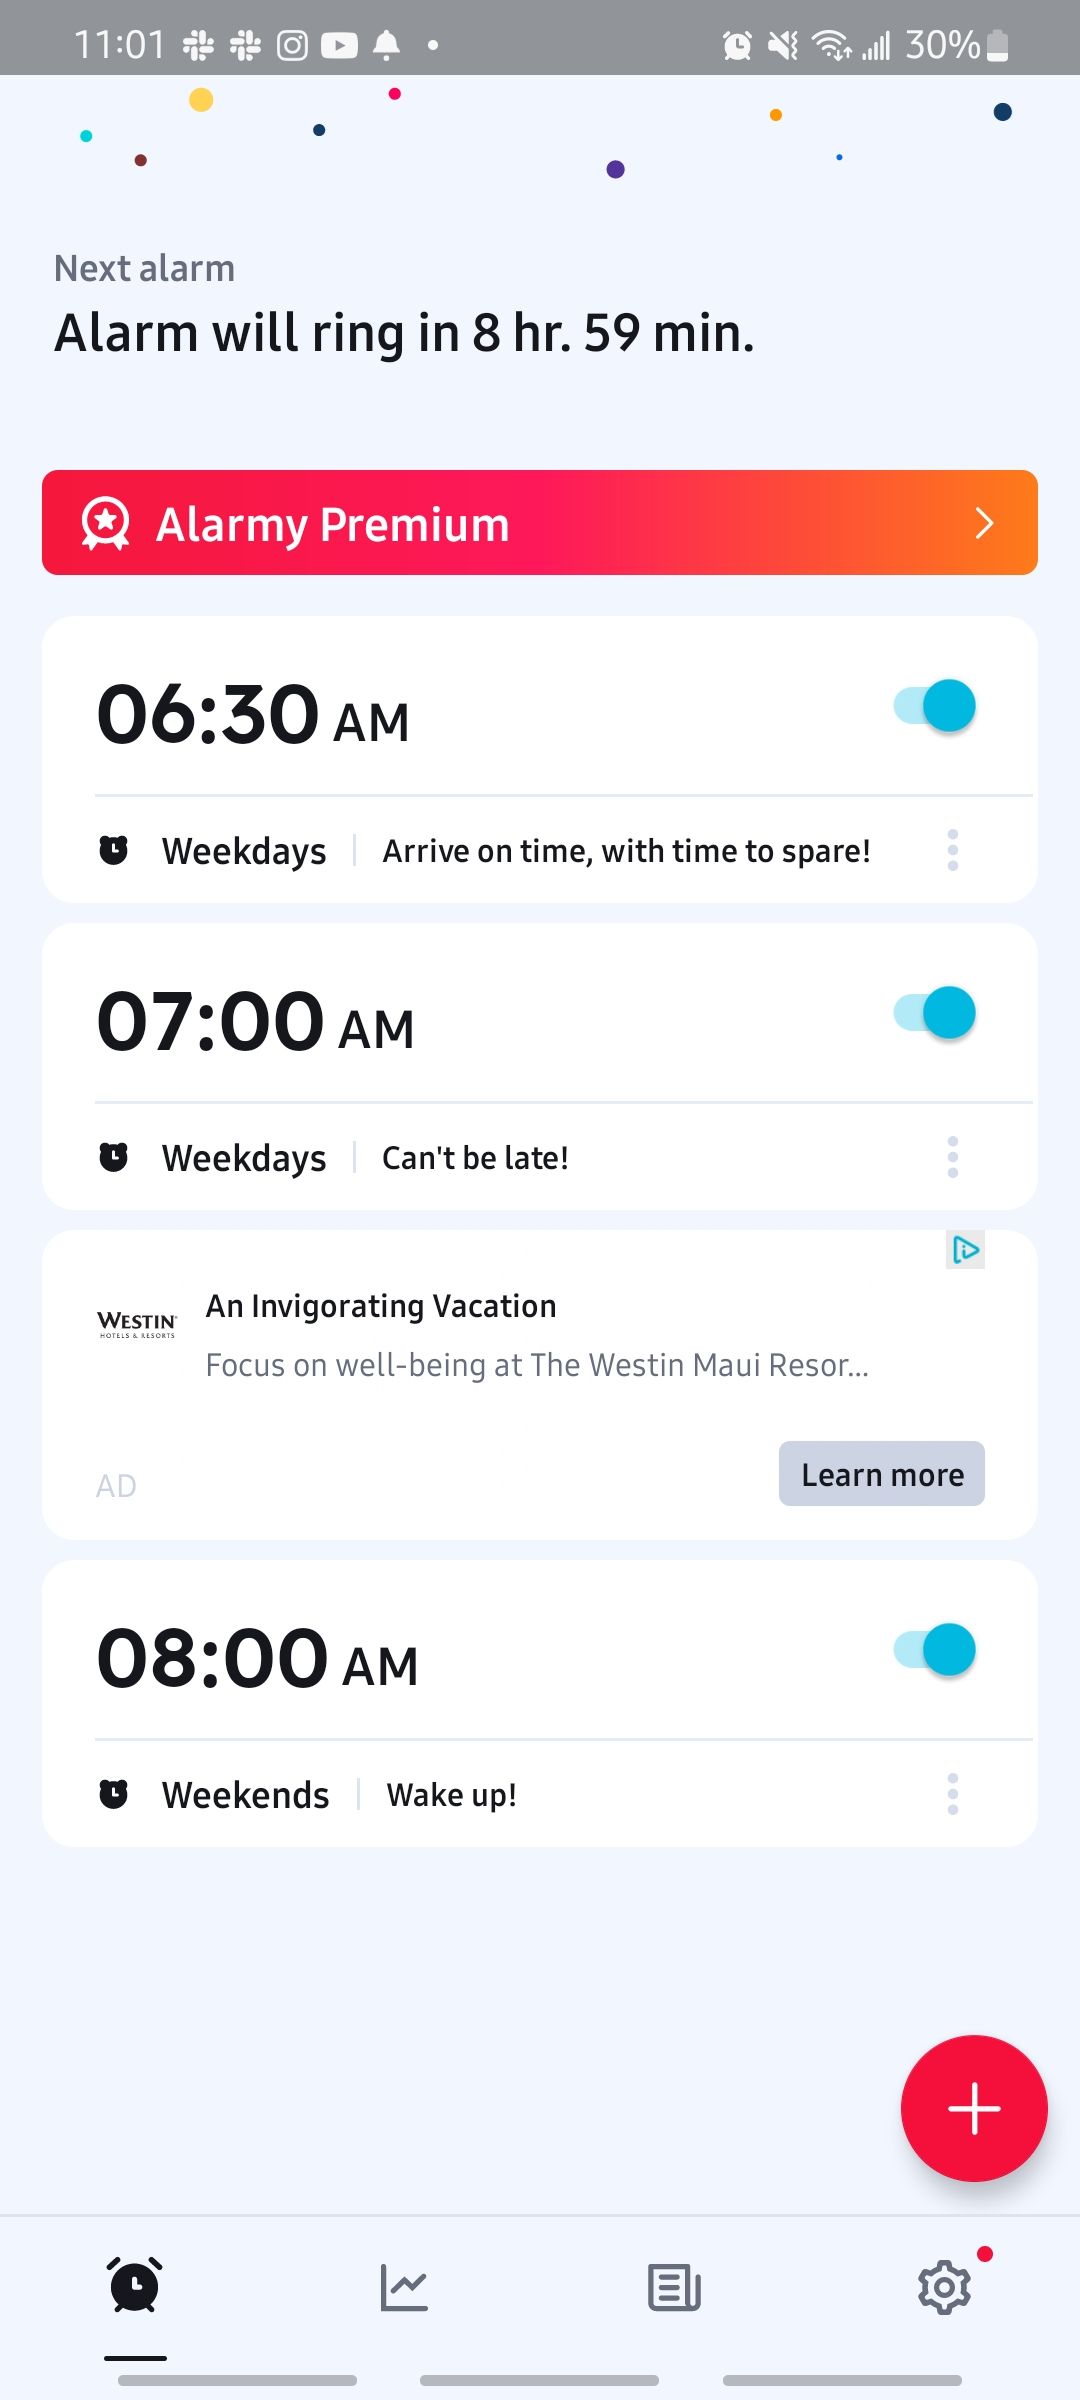 alarmy app setting different alarms and customizing them